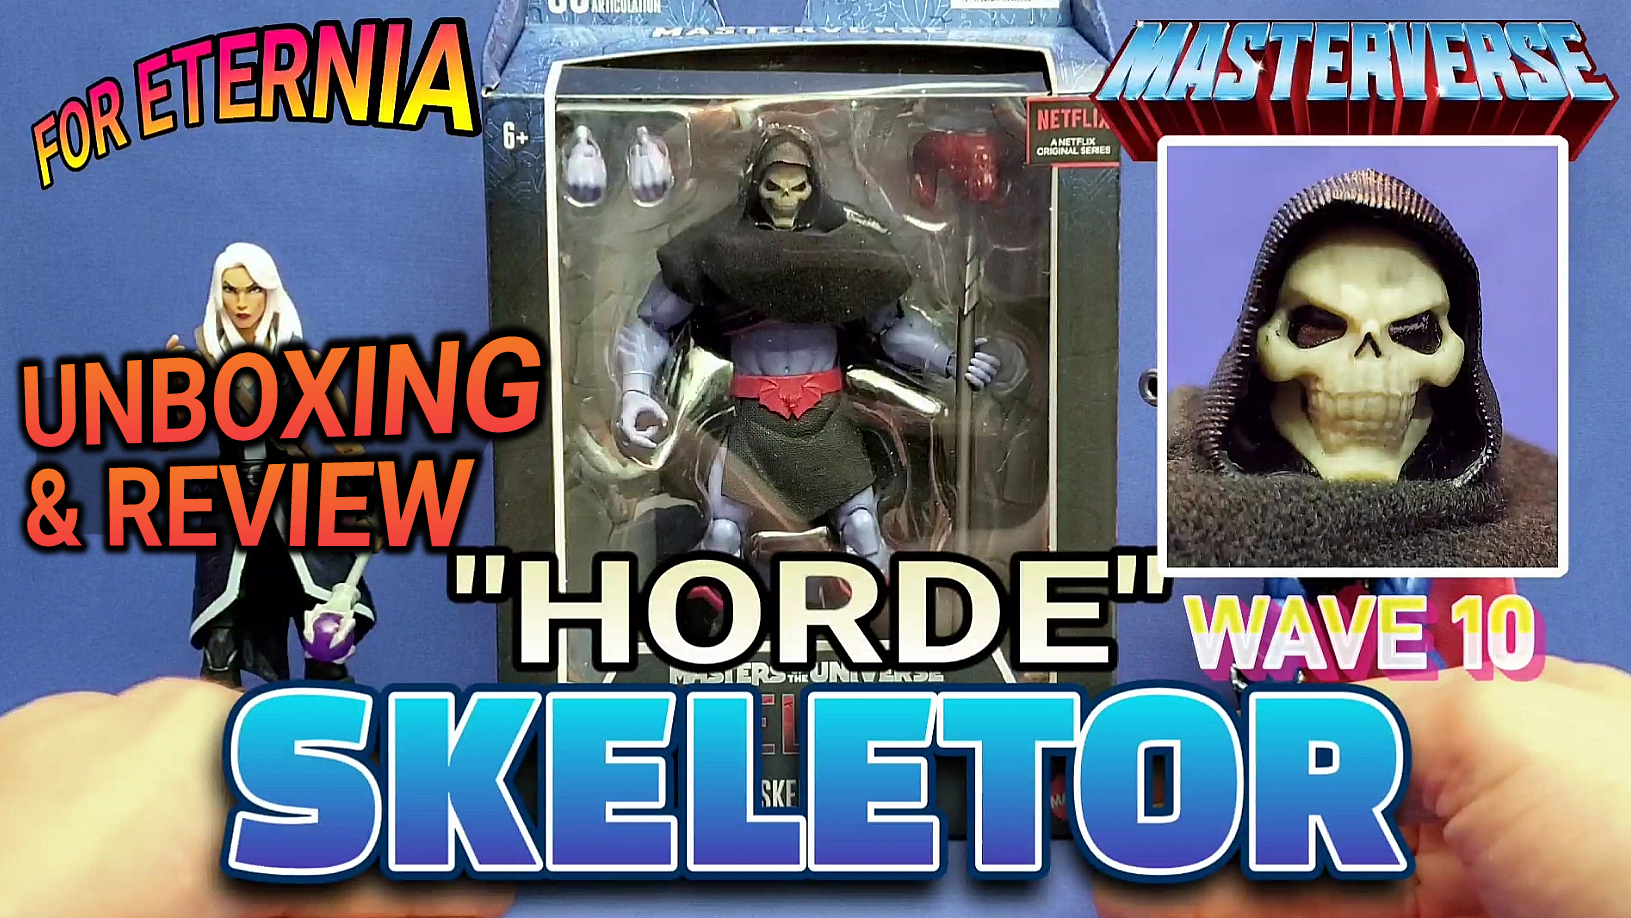 UNBOXING & REVIEW Masterverse “HORDE” SKELETOR Wave 10 Masters of the Universe: Revelation Action Figure